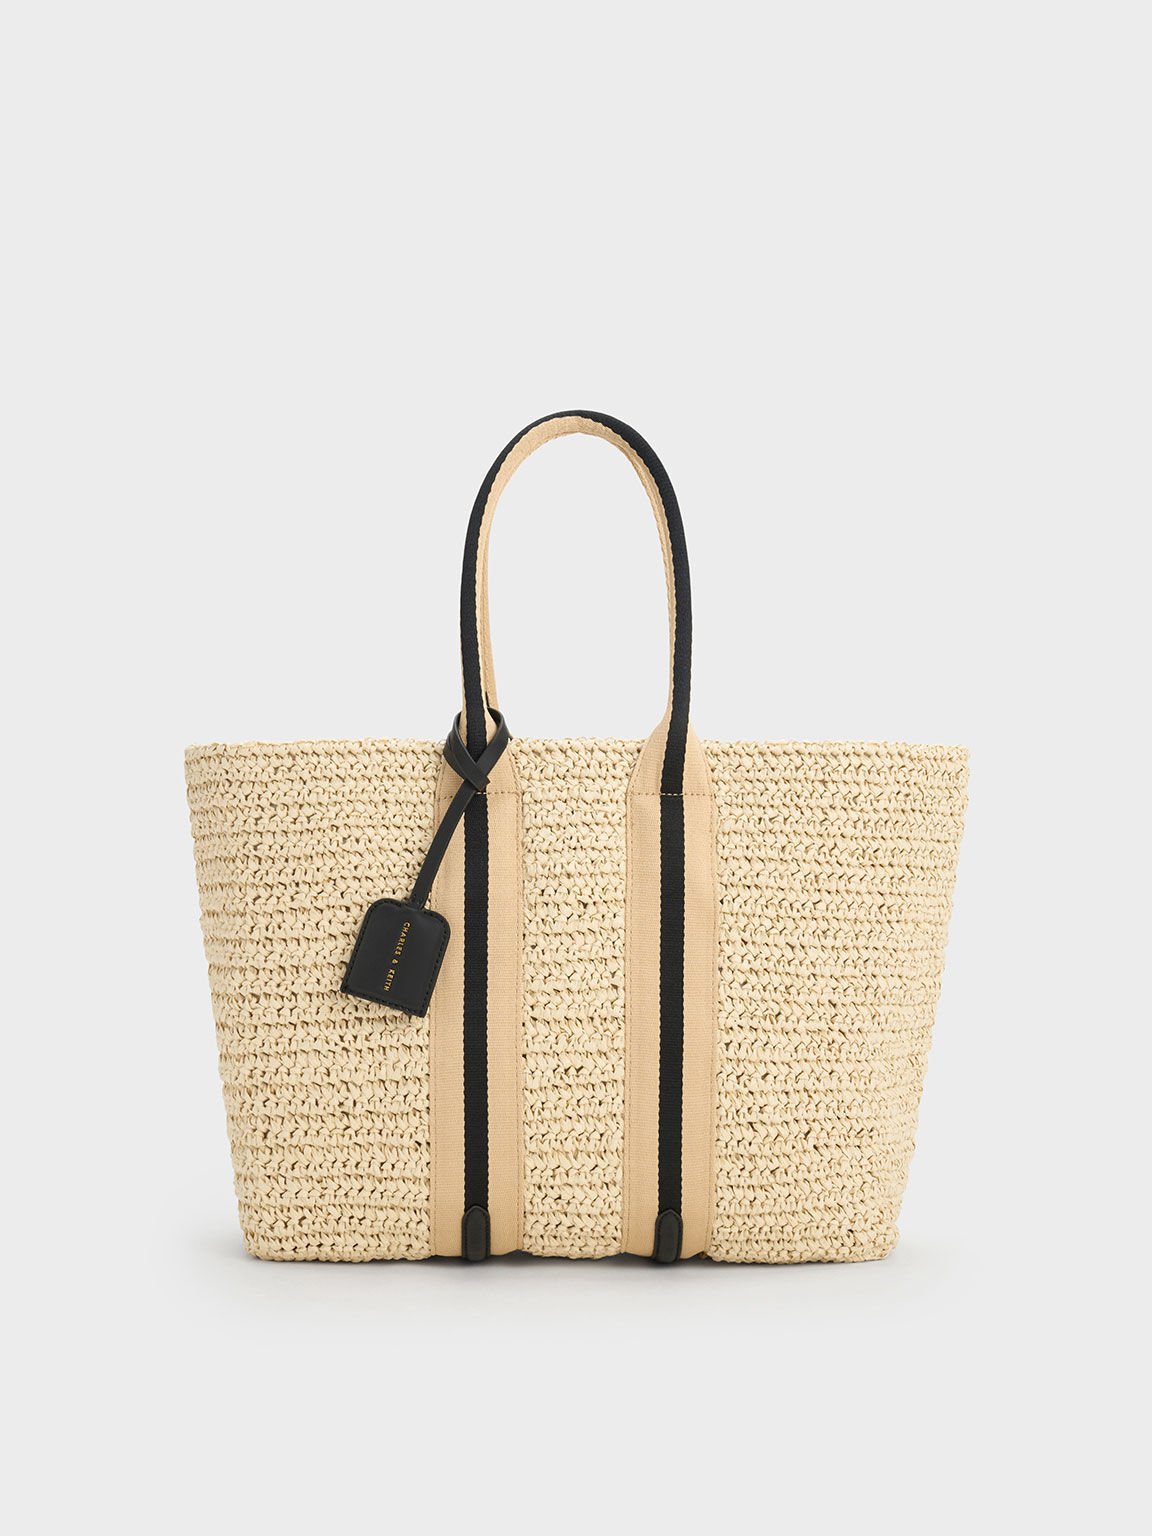 The Best Raffia And Straw Bags For Summer